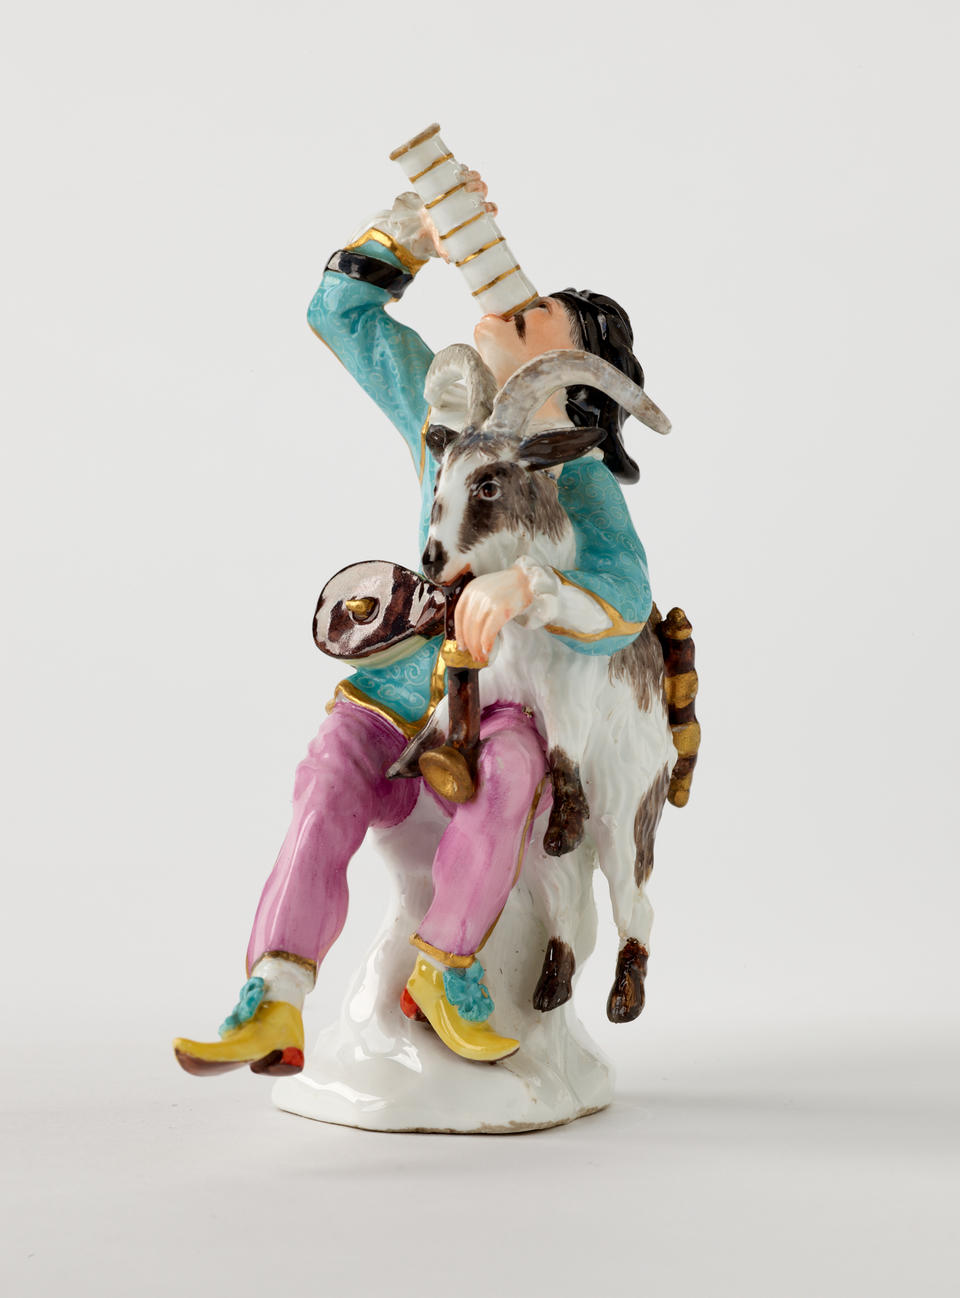 Sculpture of a light skinned man with a goat on his lap. He holds a dark brown instrument in one hand and drinks from a vessel in the other. 